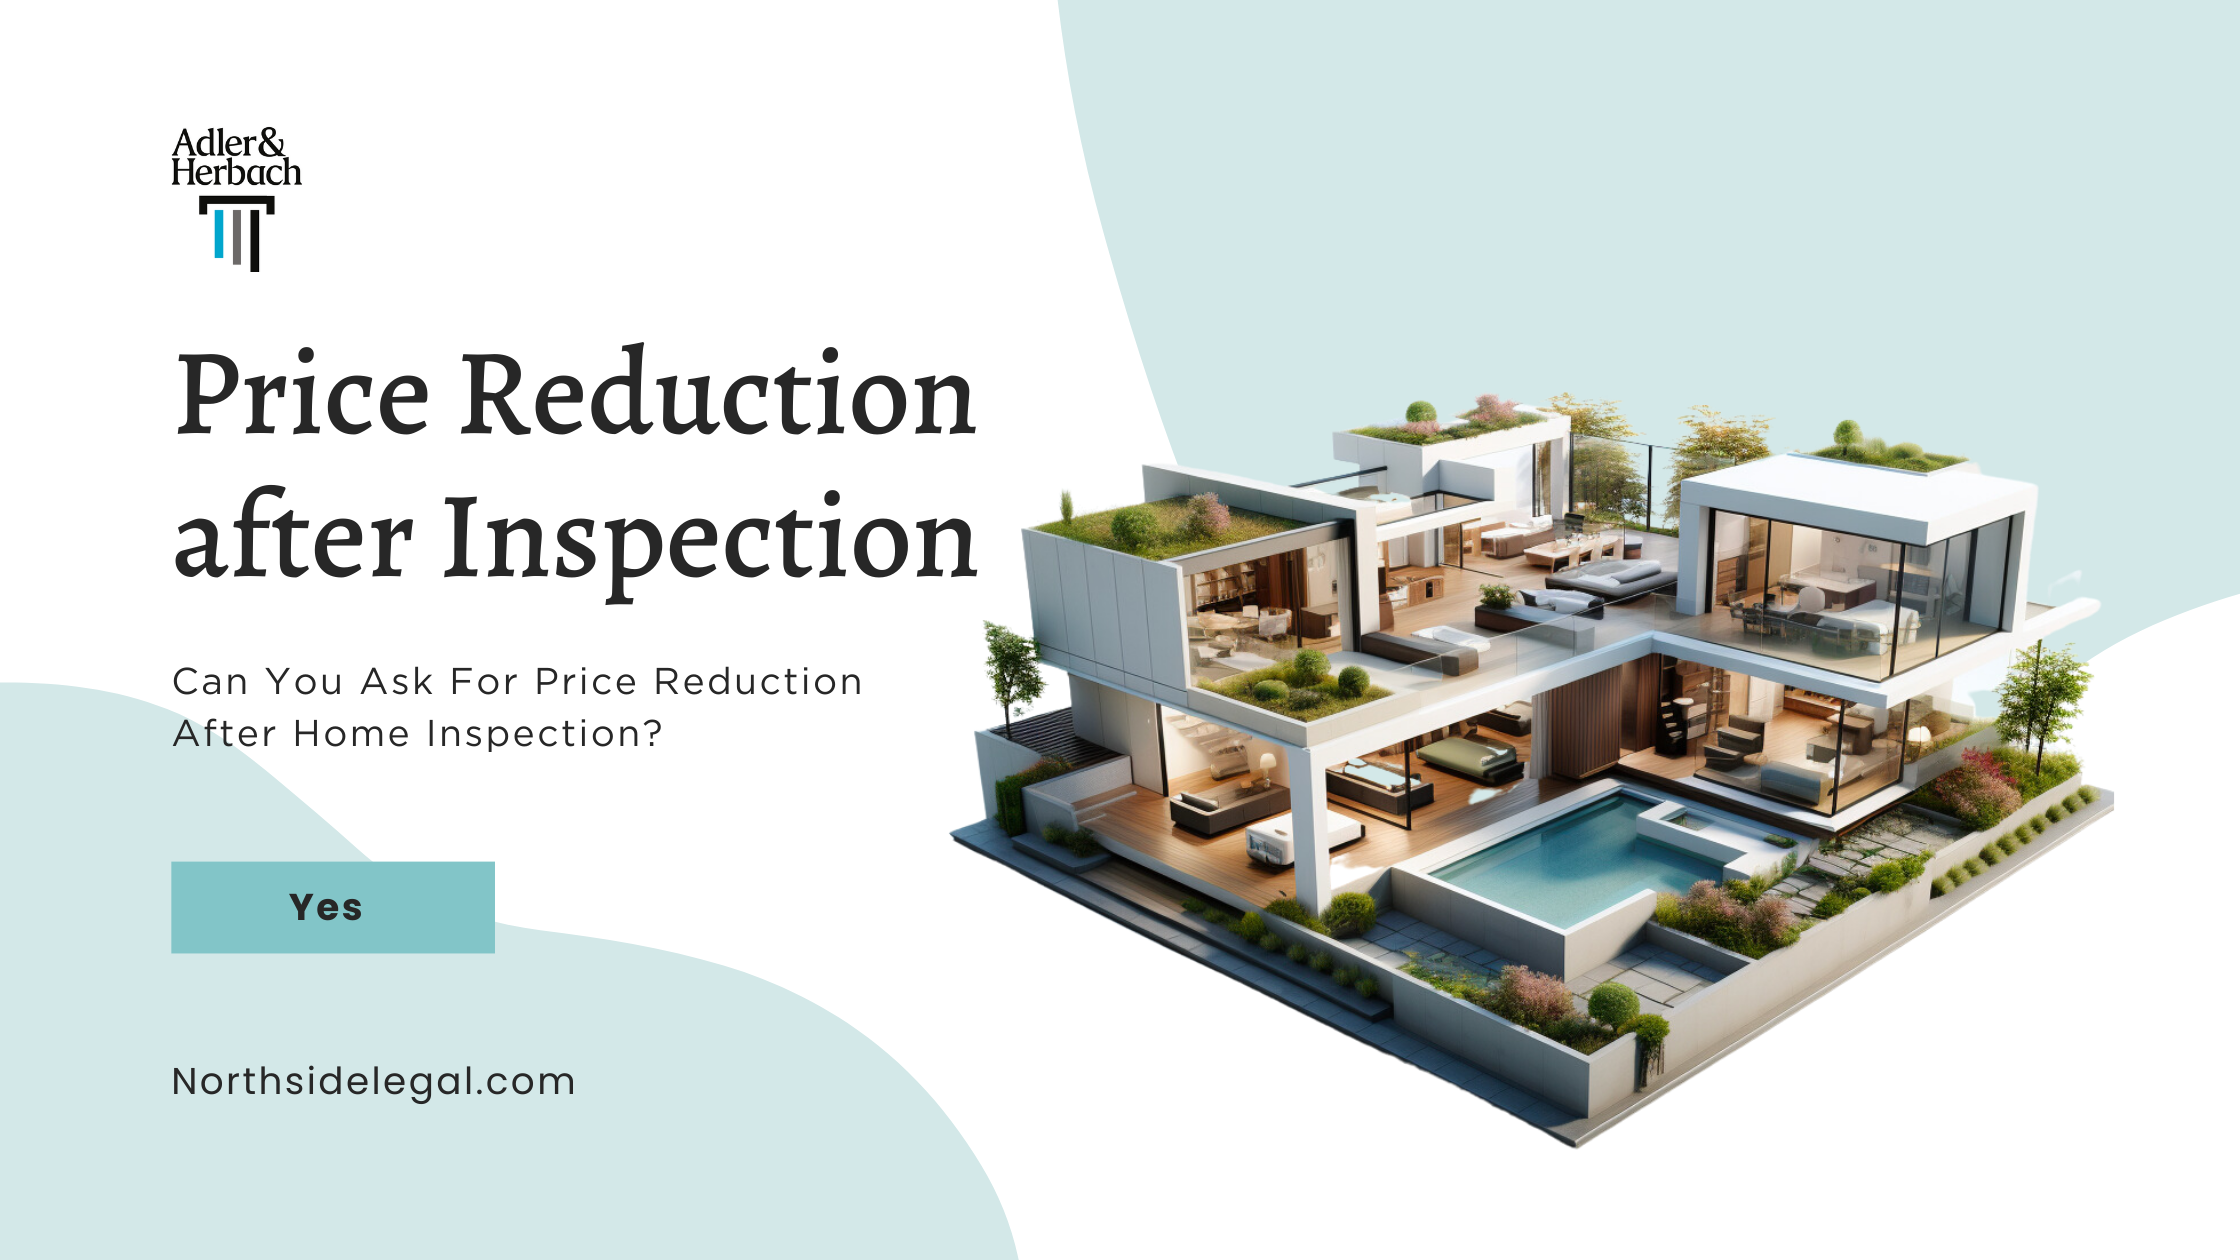 Can You Ask For Price Reduction After Inspection In Chicago?